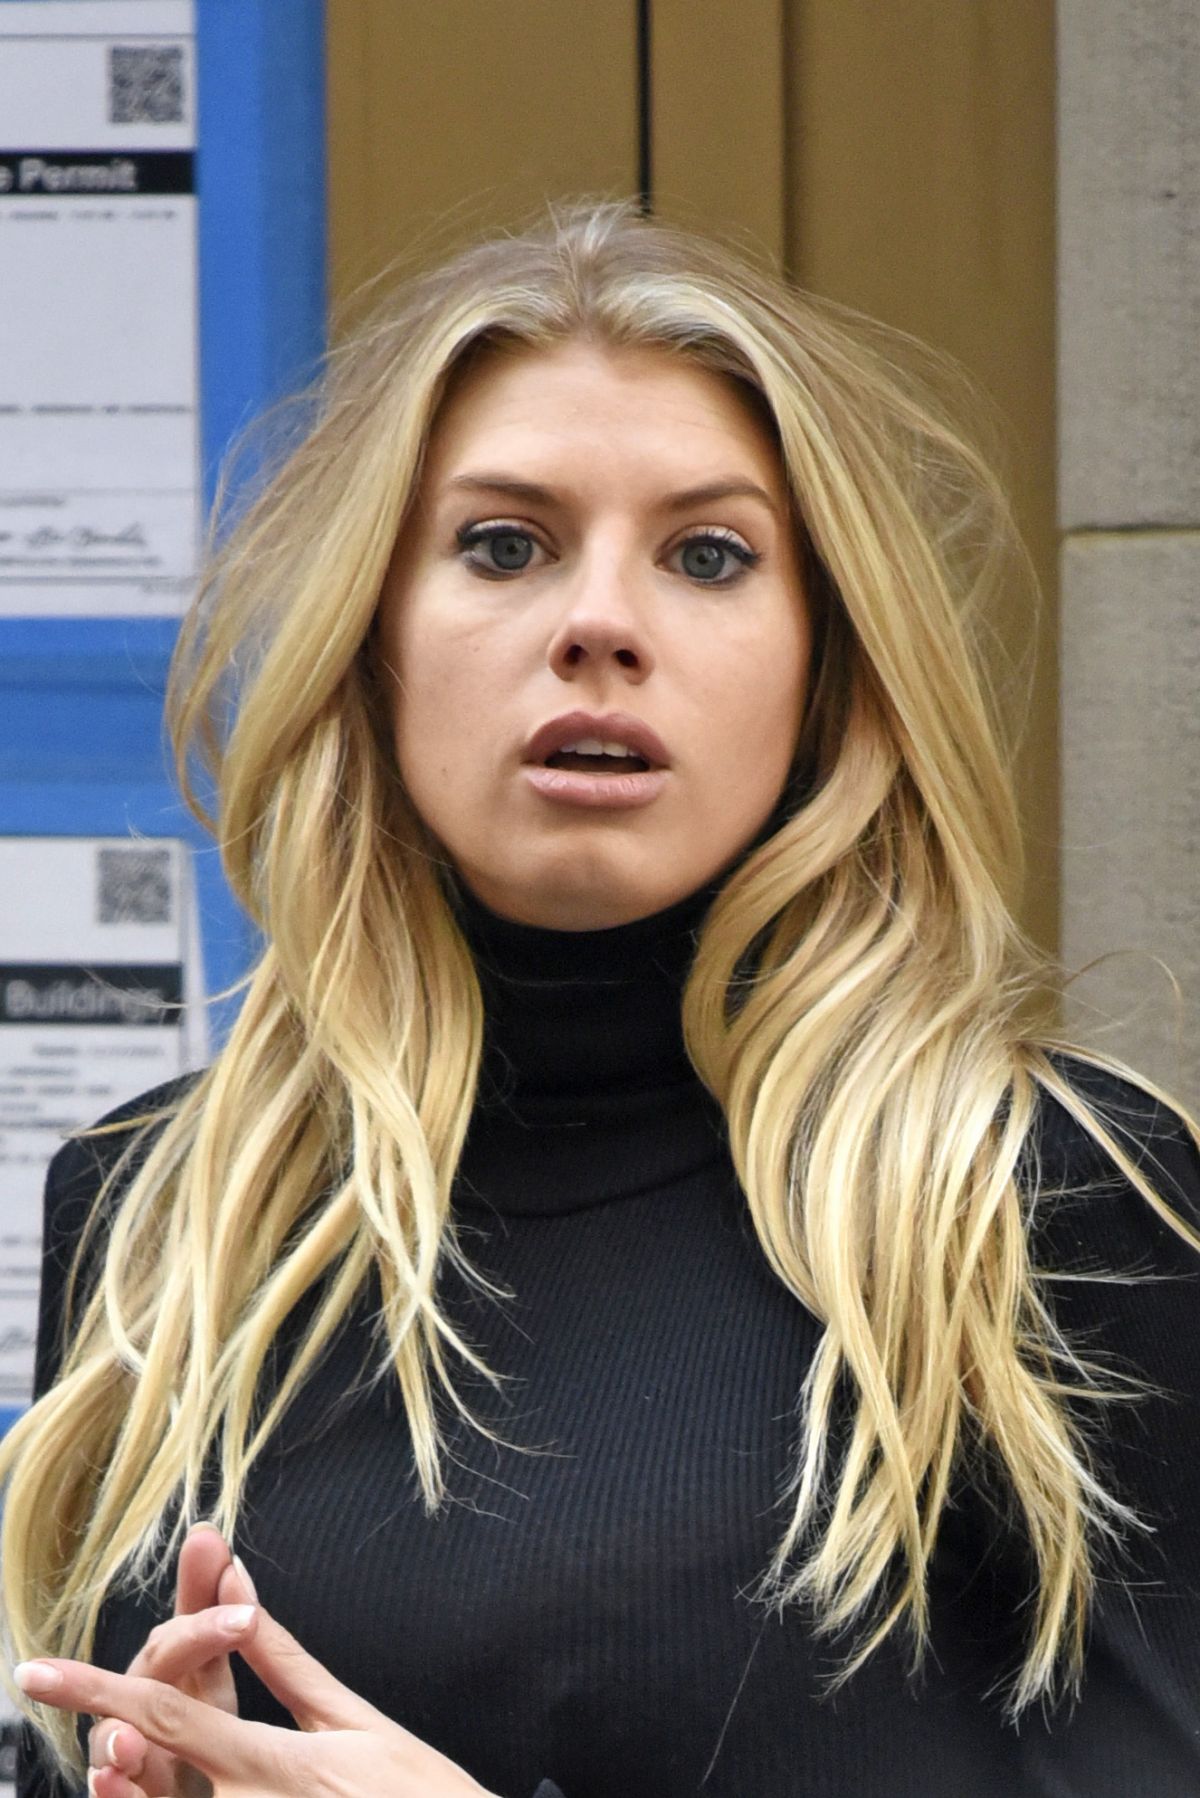 charlotte-mckinney-on-the-set-of-a-photoshoot-in-new-york-01-14-2016_1 HawtCelebs